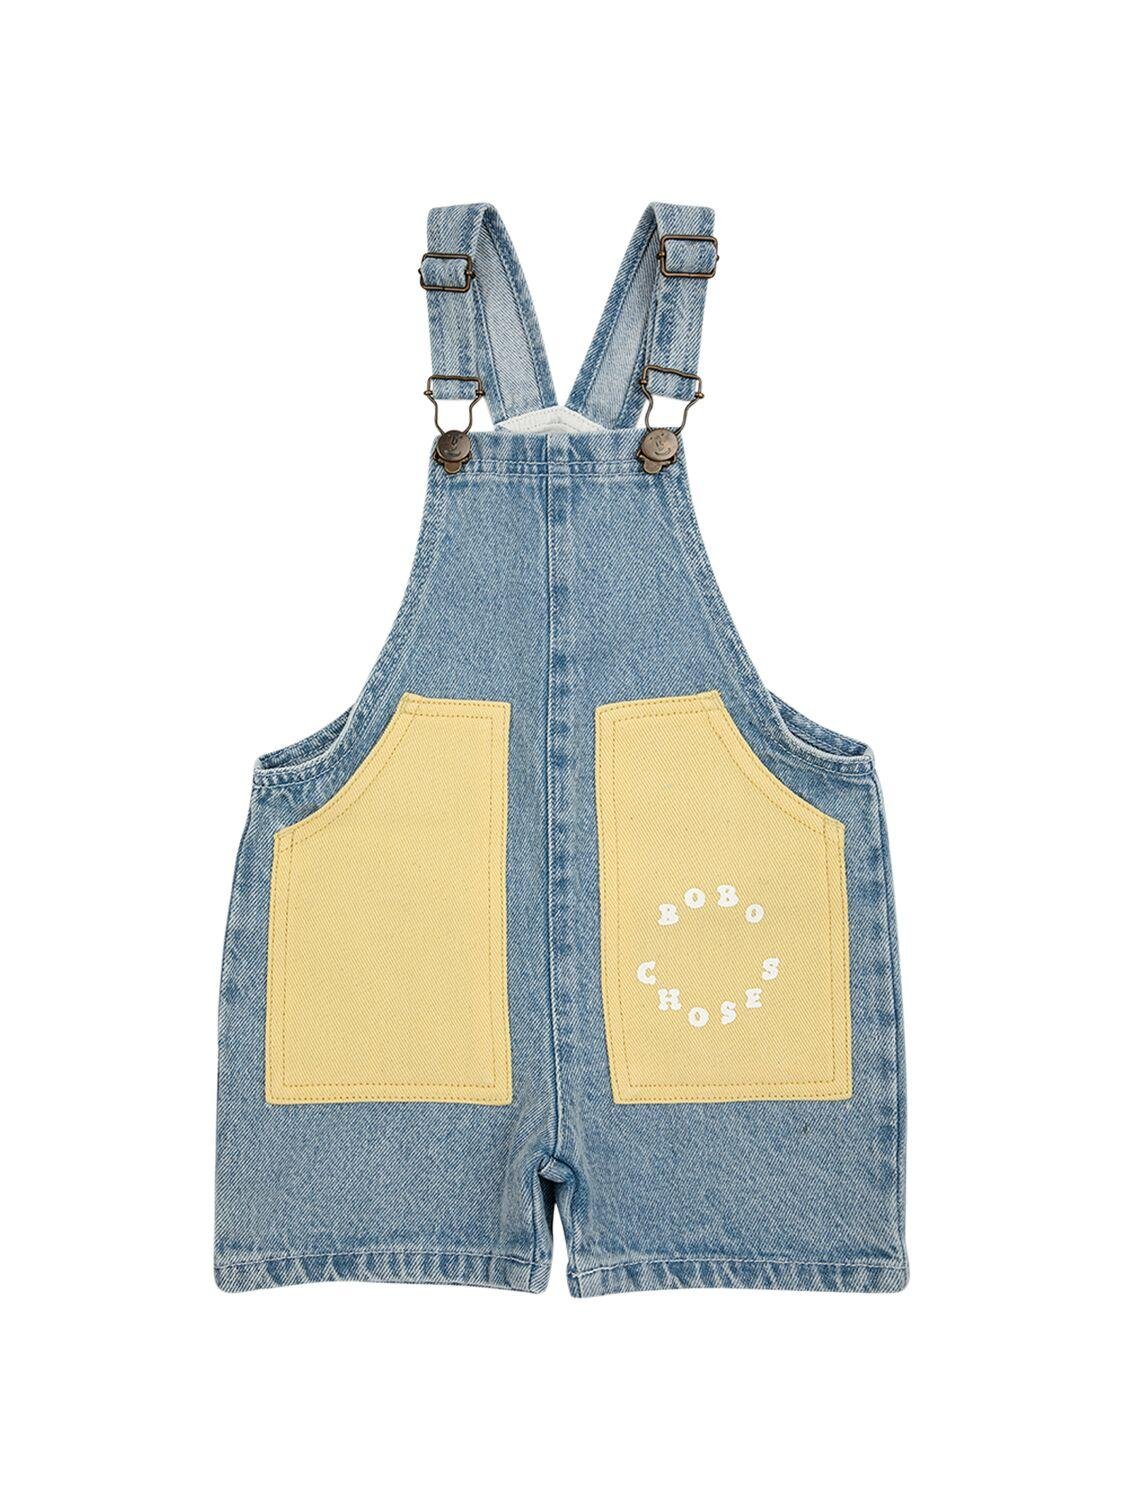 Denim Overalls by BOBO CHOSES